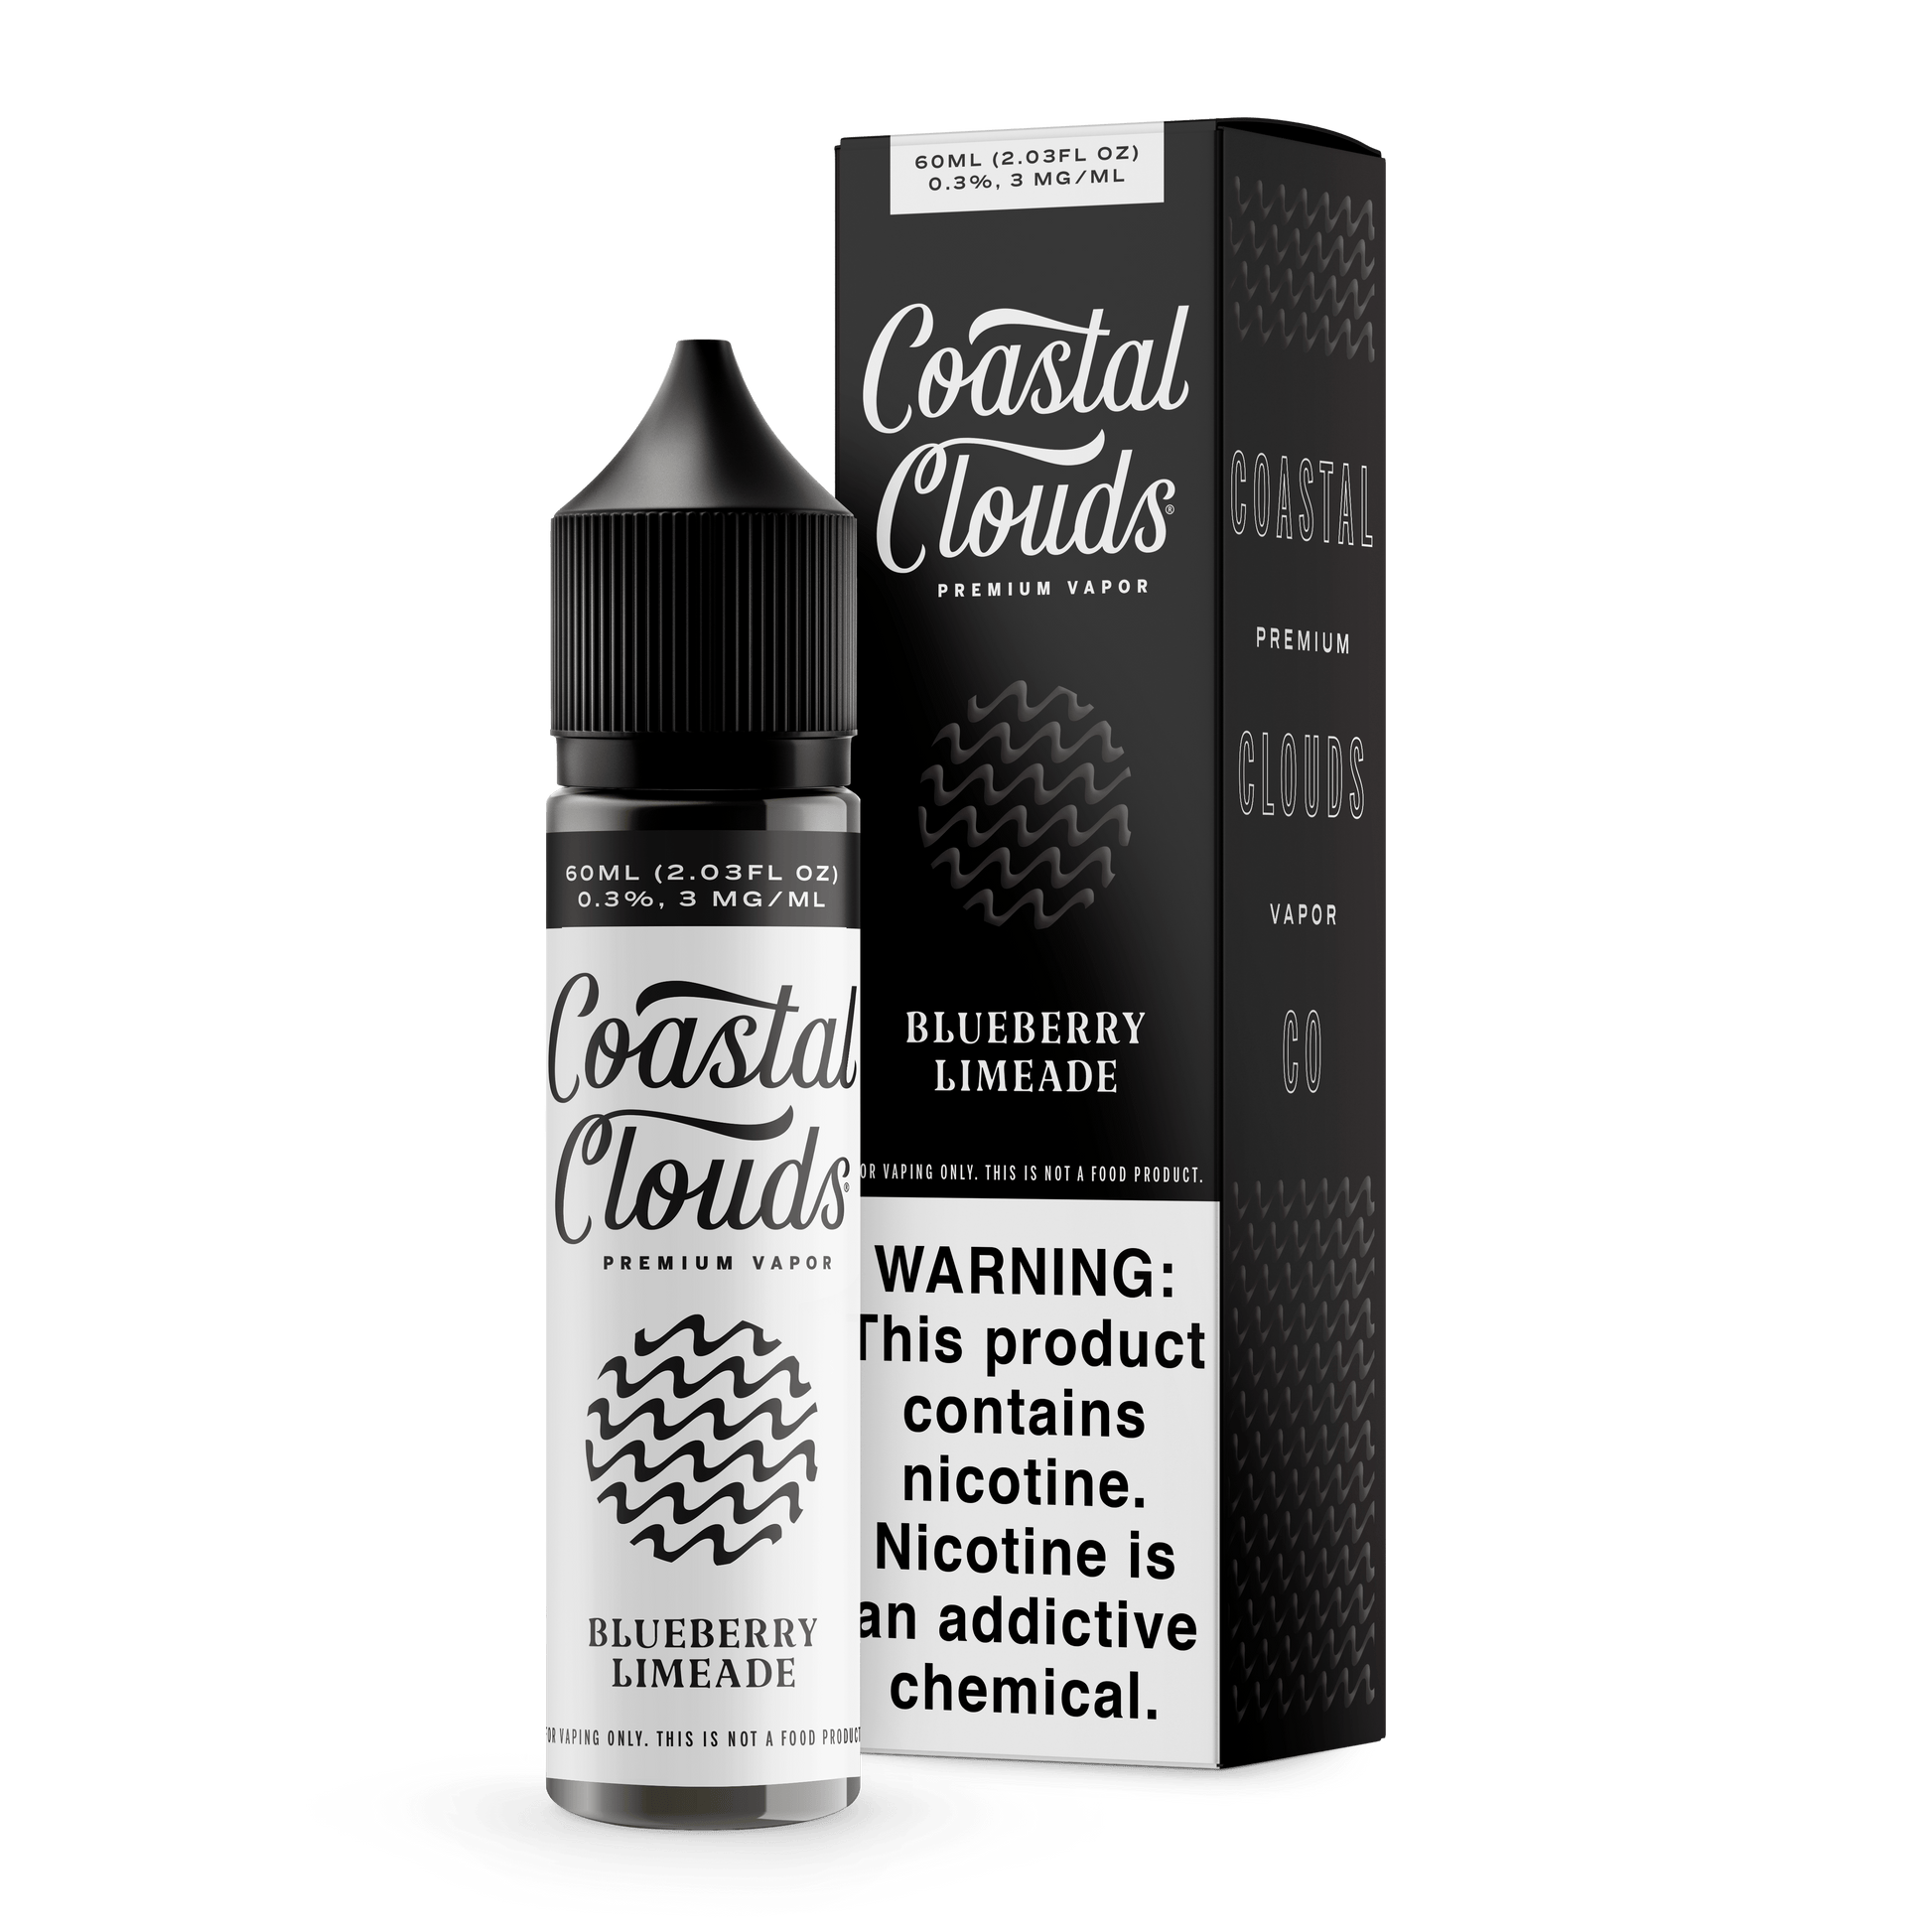 Blueberry Limeade by Coastal Clouds Series 60mL with Packaging